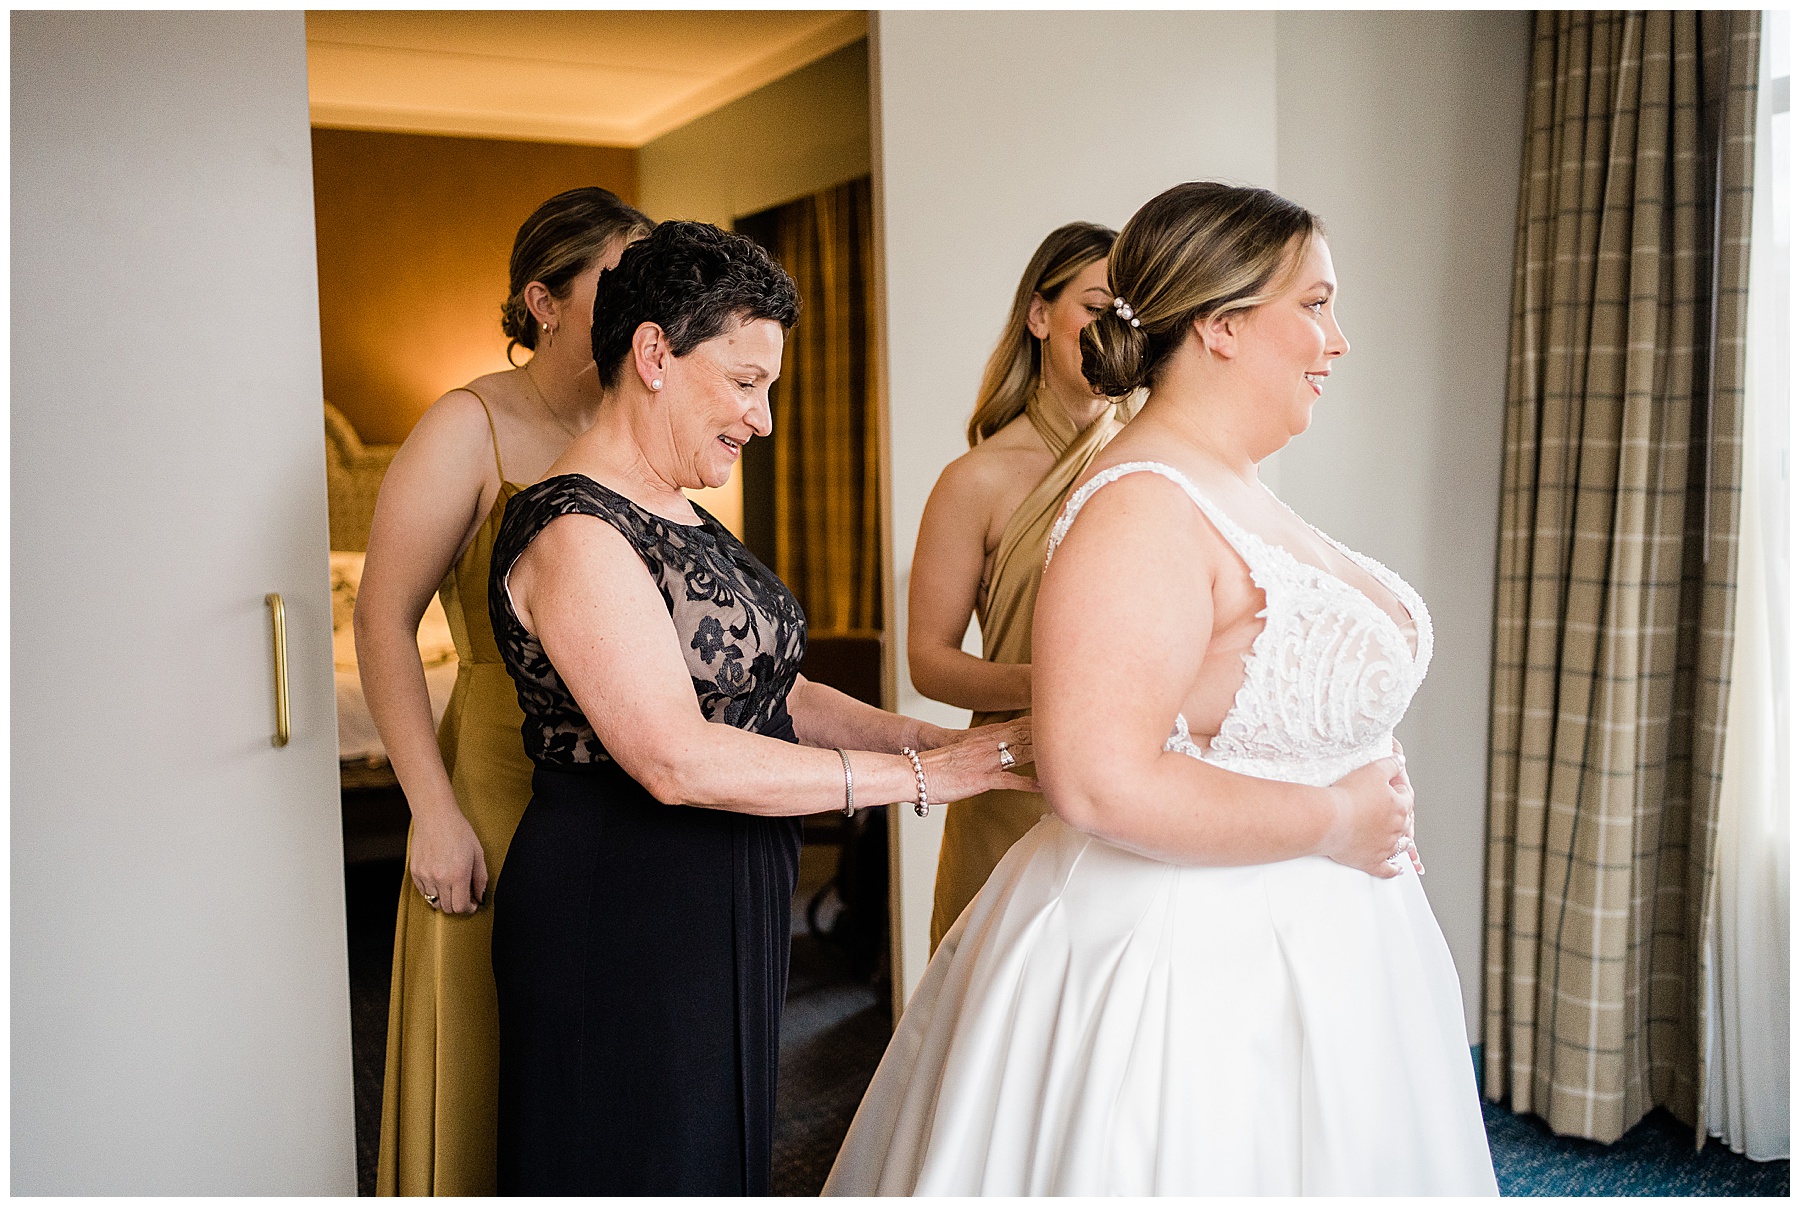 bride getting into dress with help of mother and bridesmaids on wedding day